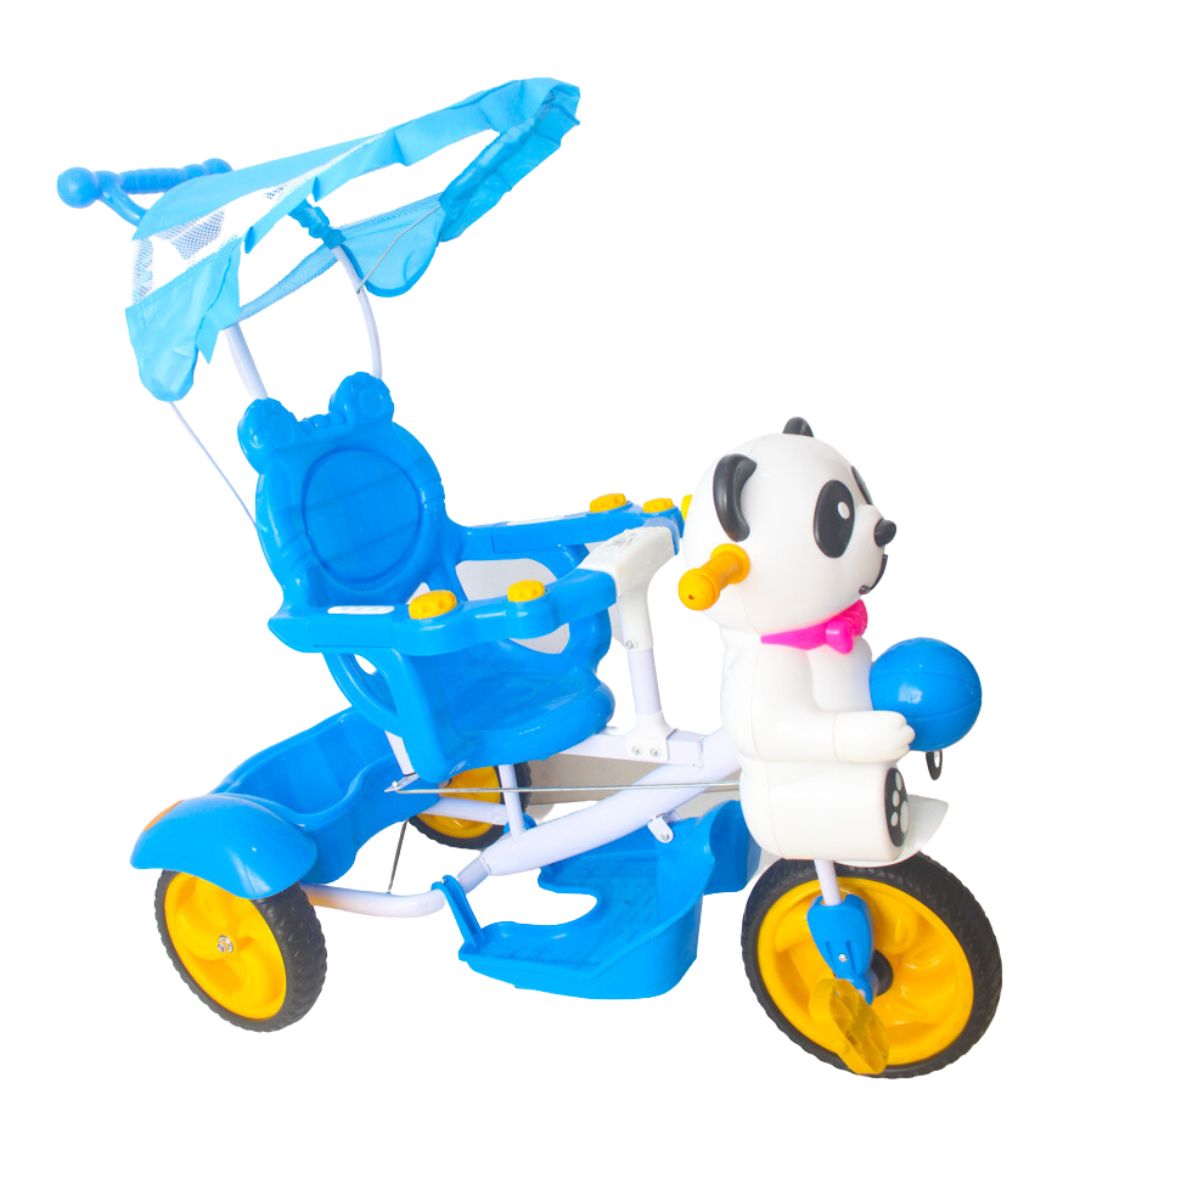 Panda Baby Tricycle